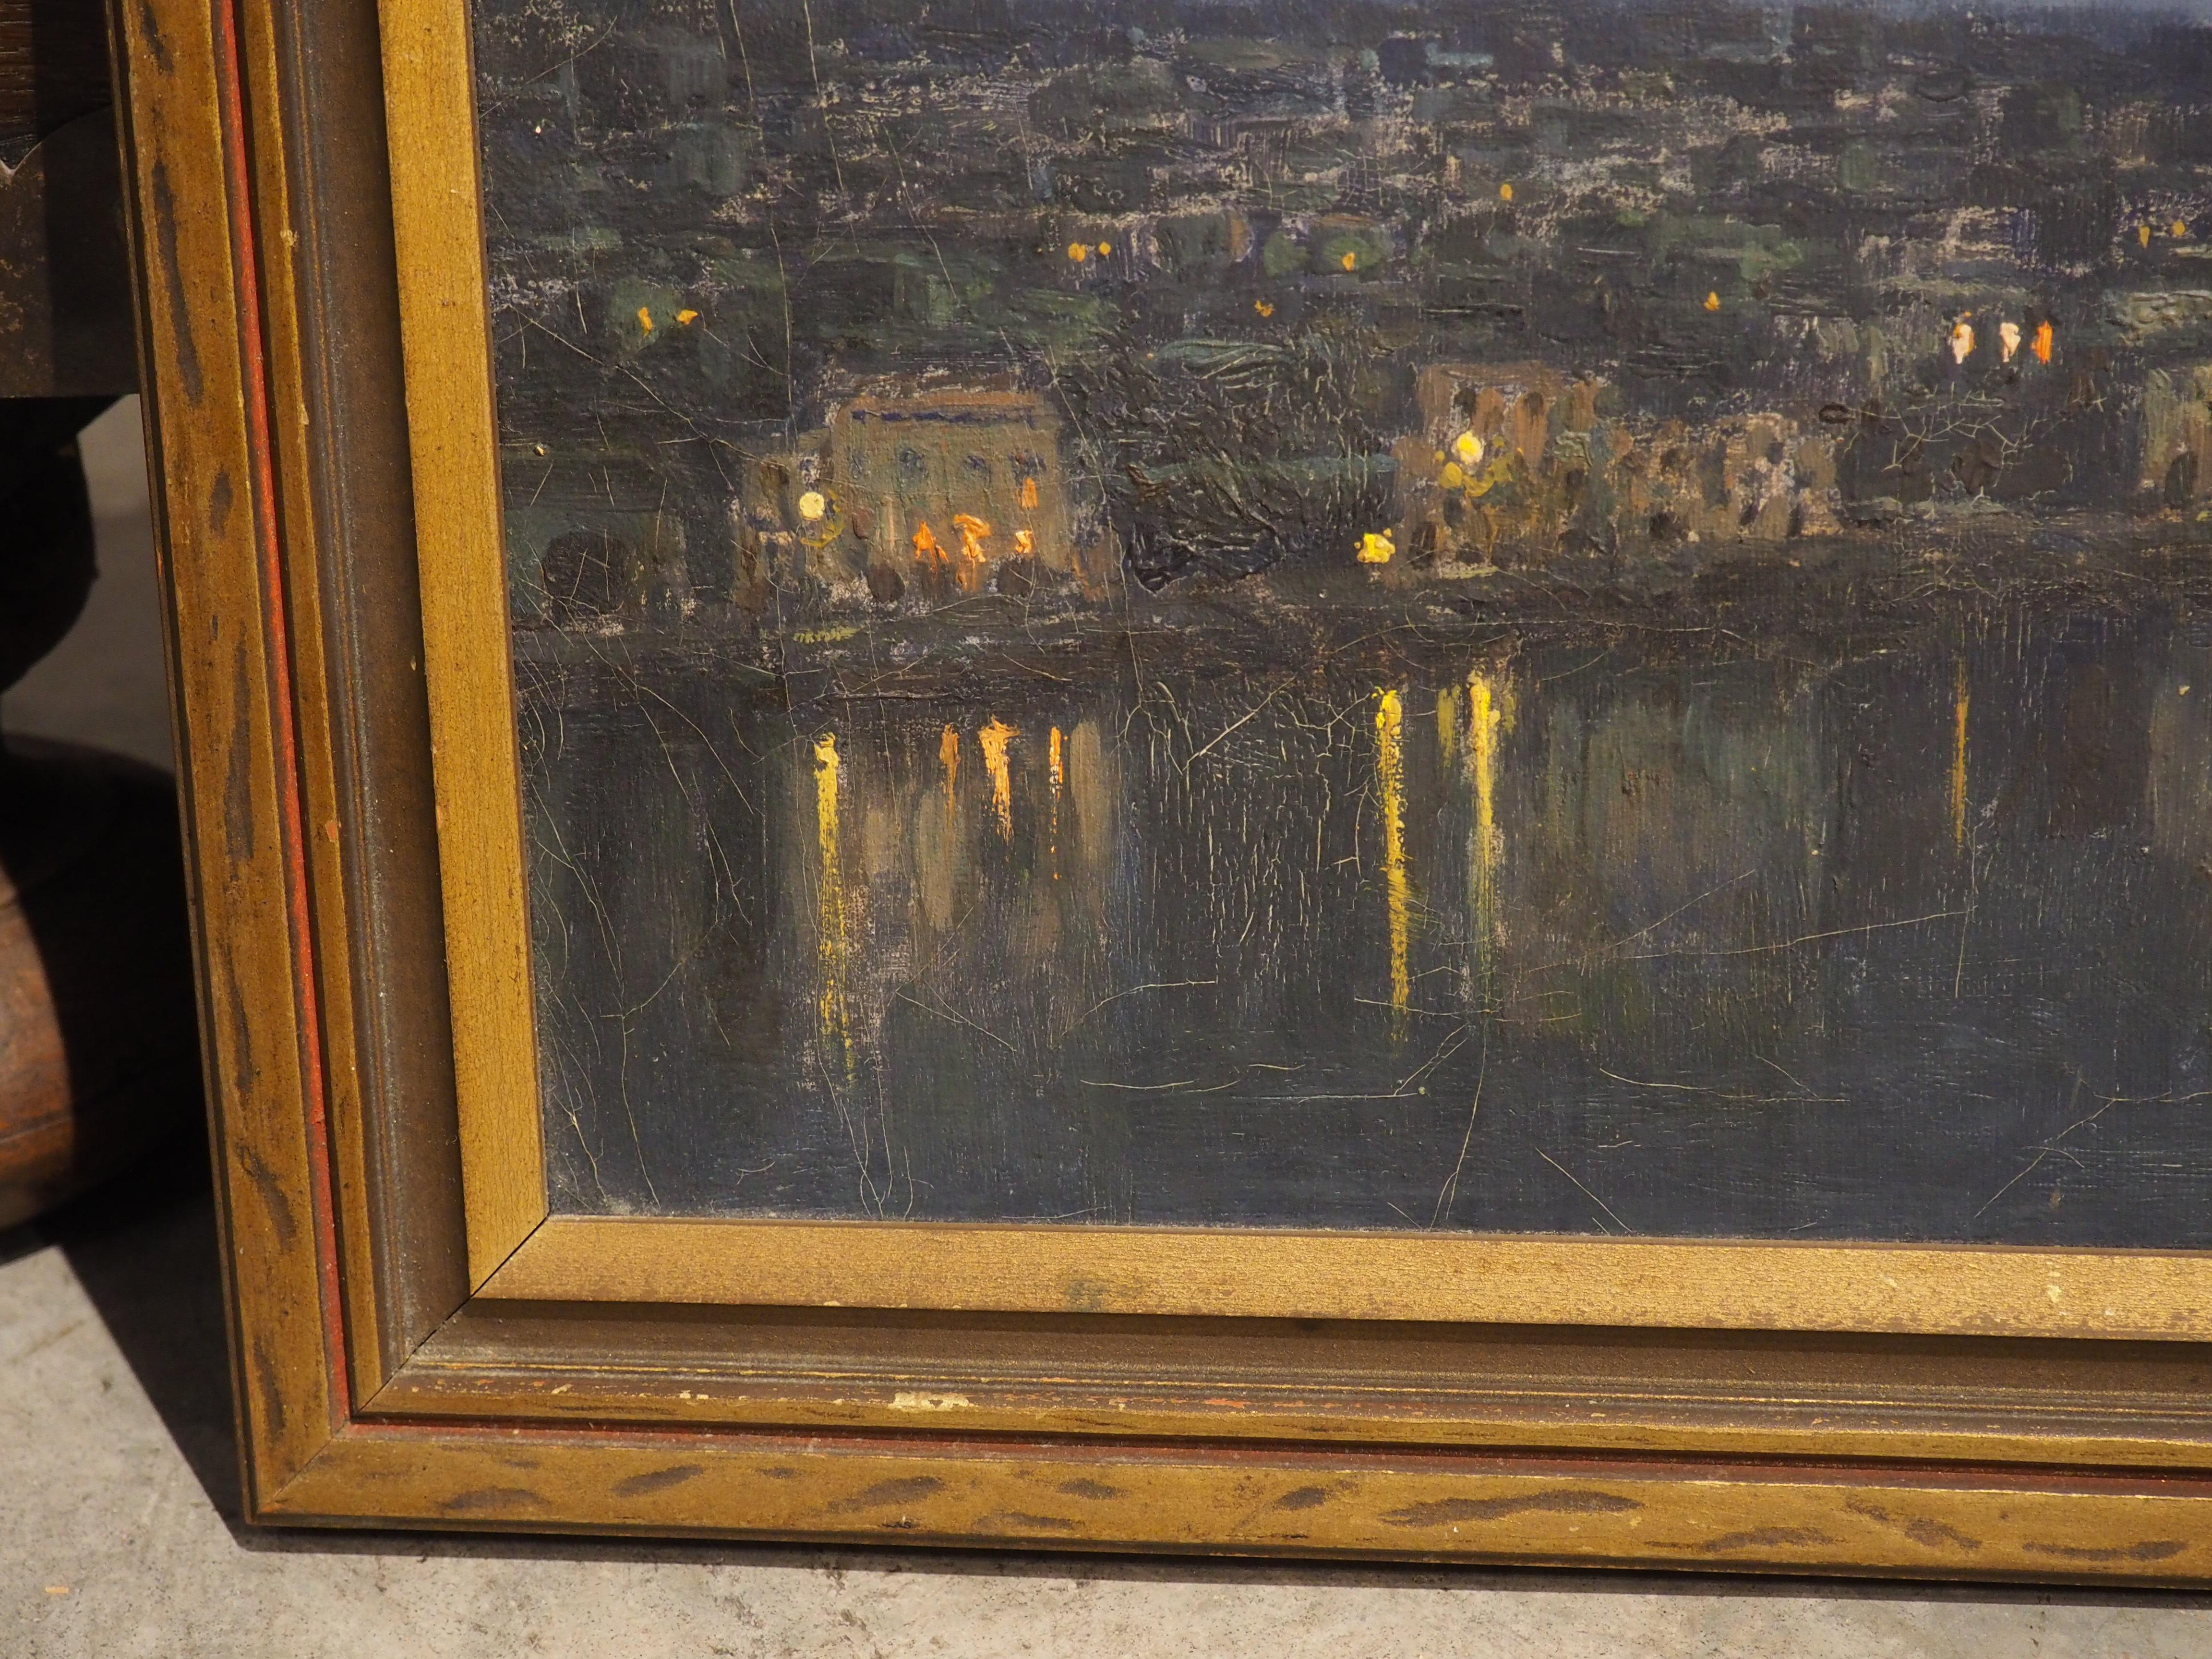 Hand-Painted The Italian Seaside at Night, Oil on Canvas Painting, Nicola Ascione (1870-1957) For Sale